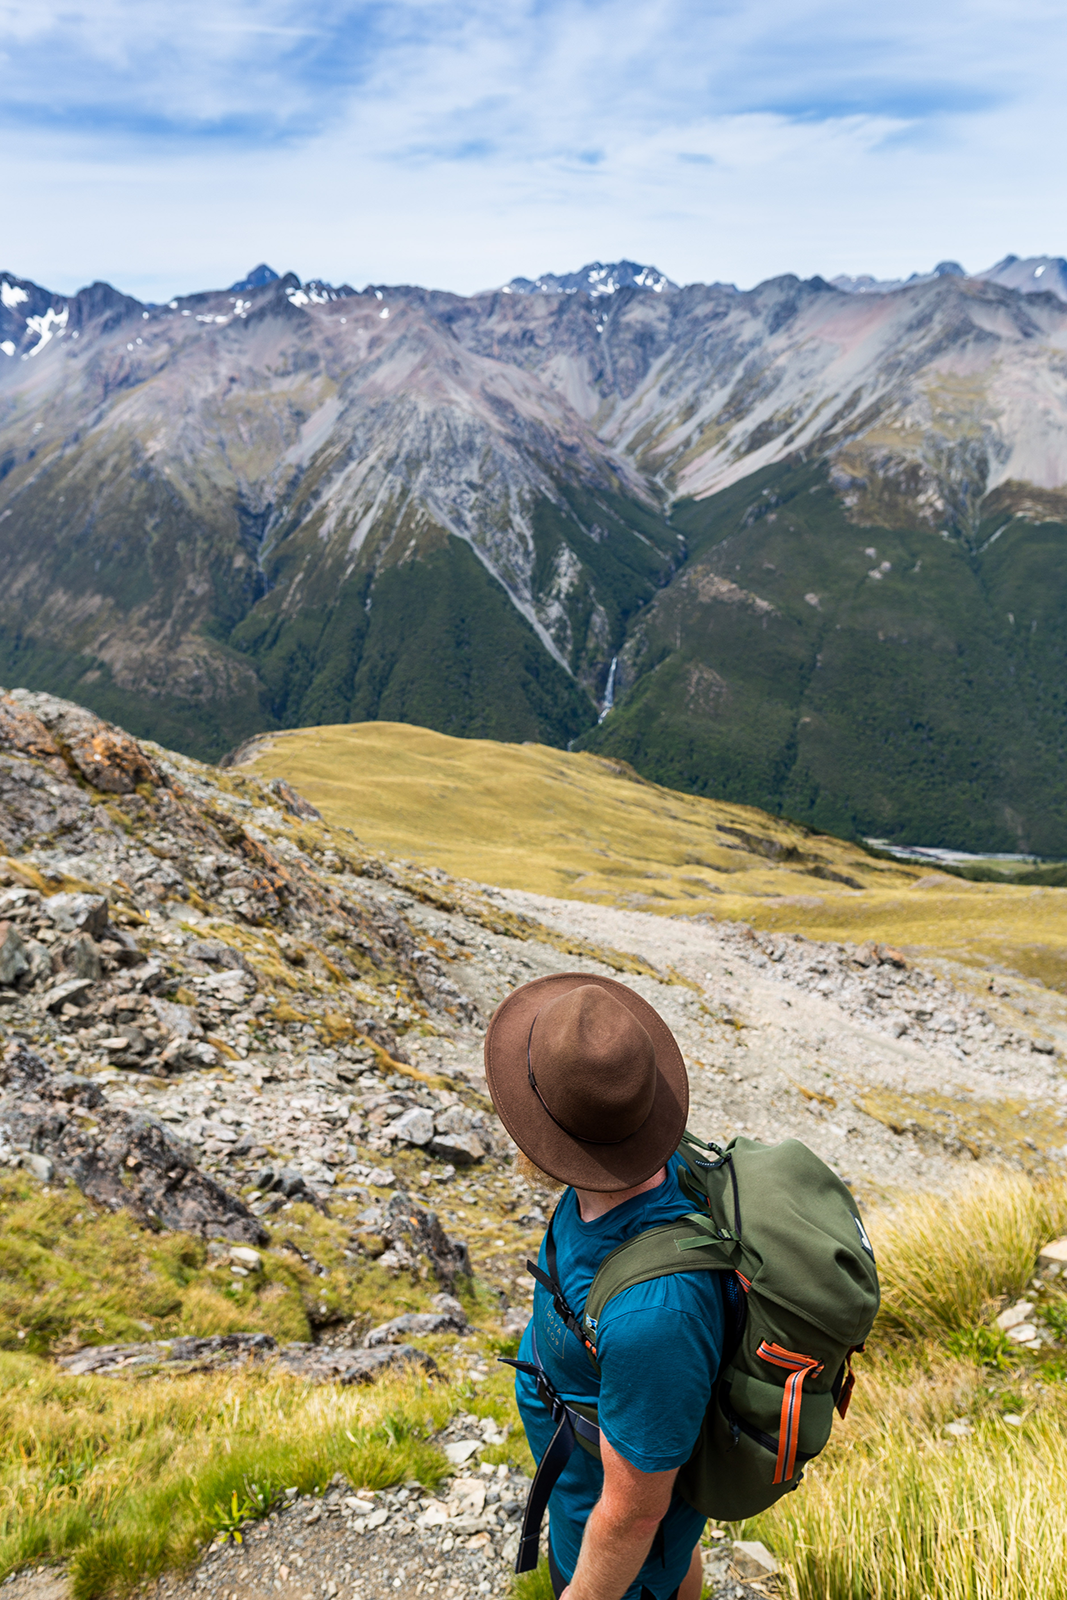 Man hiking mountains stops to take in the view. Wearing a hat he looks out over the valley and mountain range. 